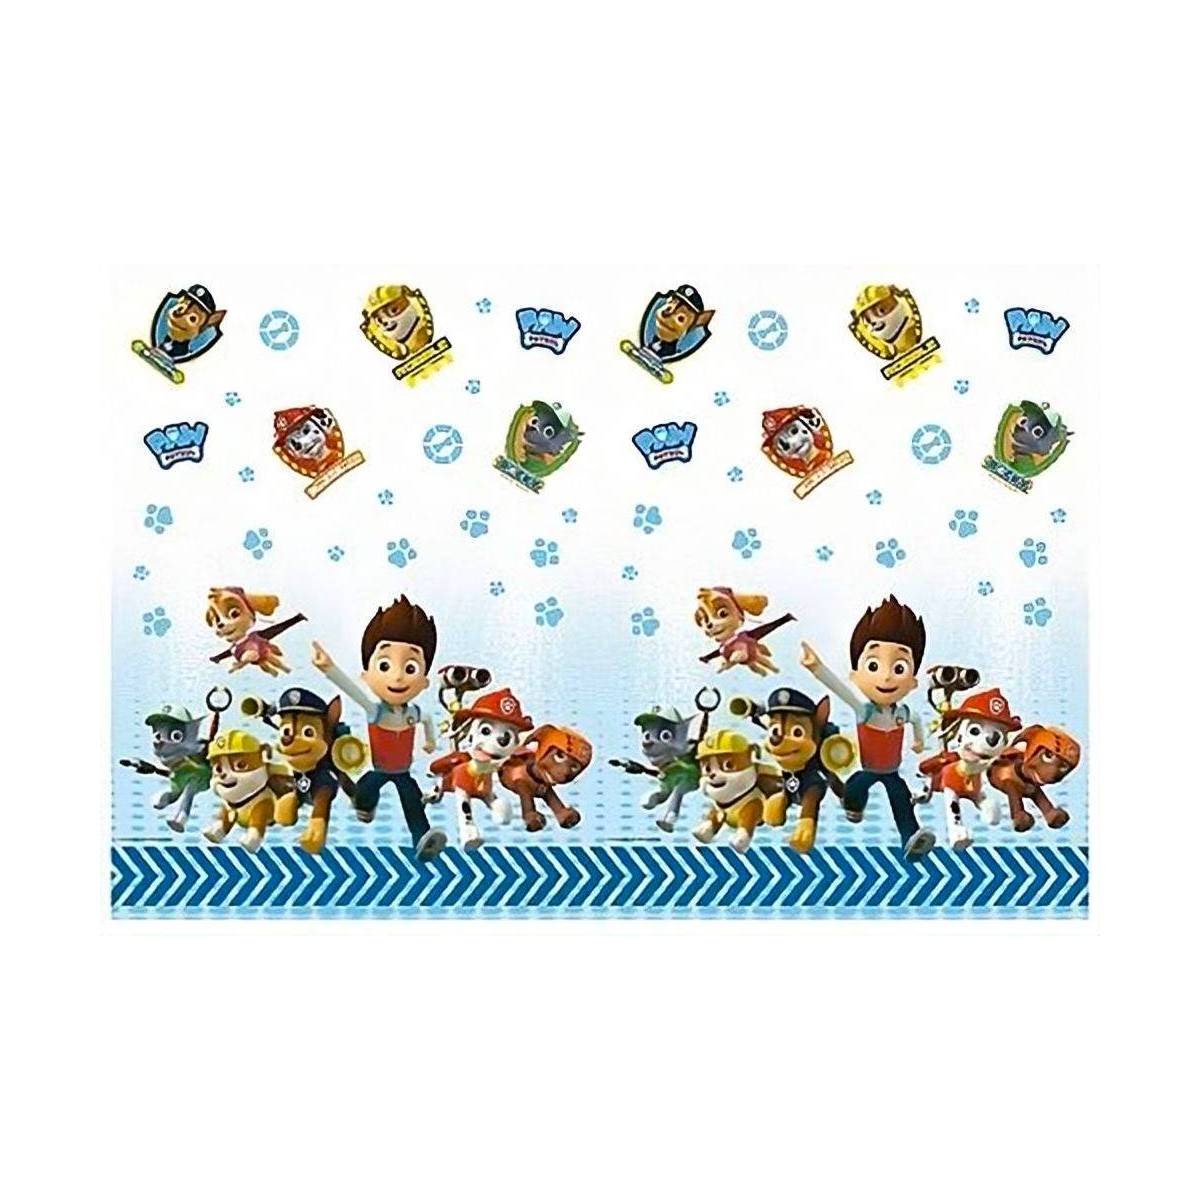 Paw patrol tablecloth with protective film 120 x 180cm